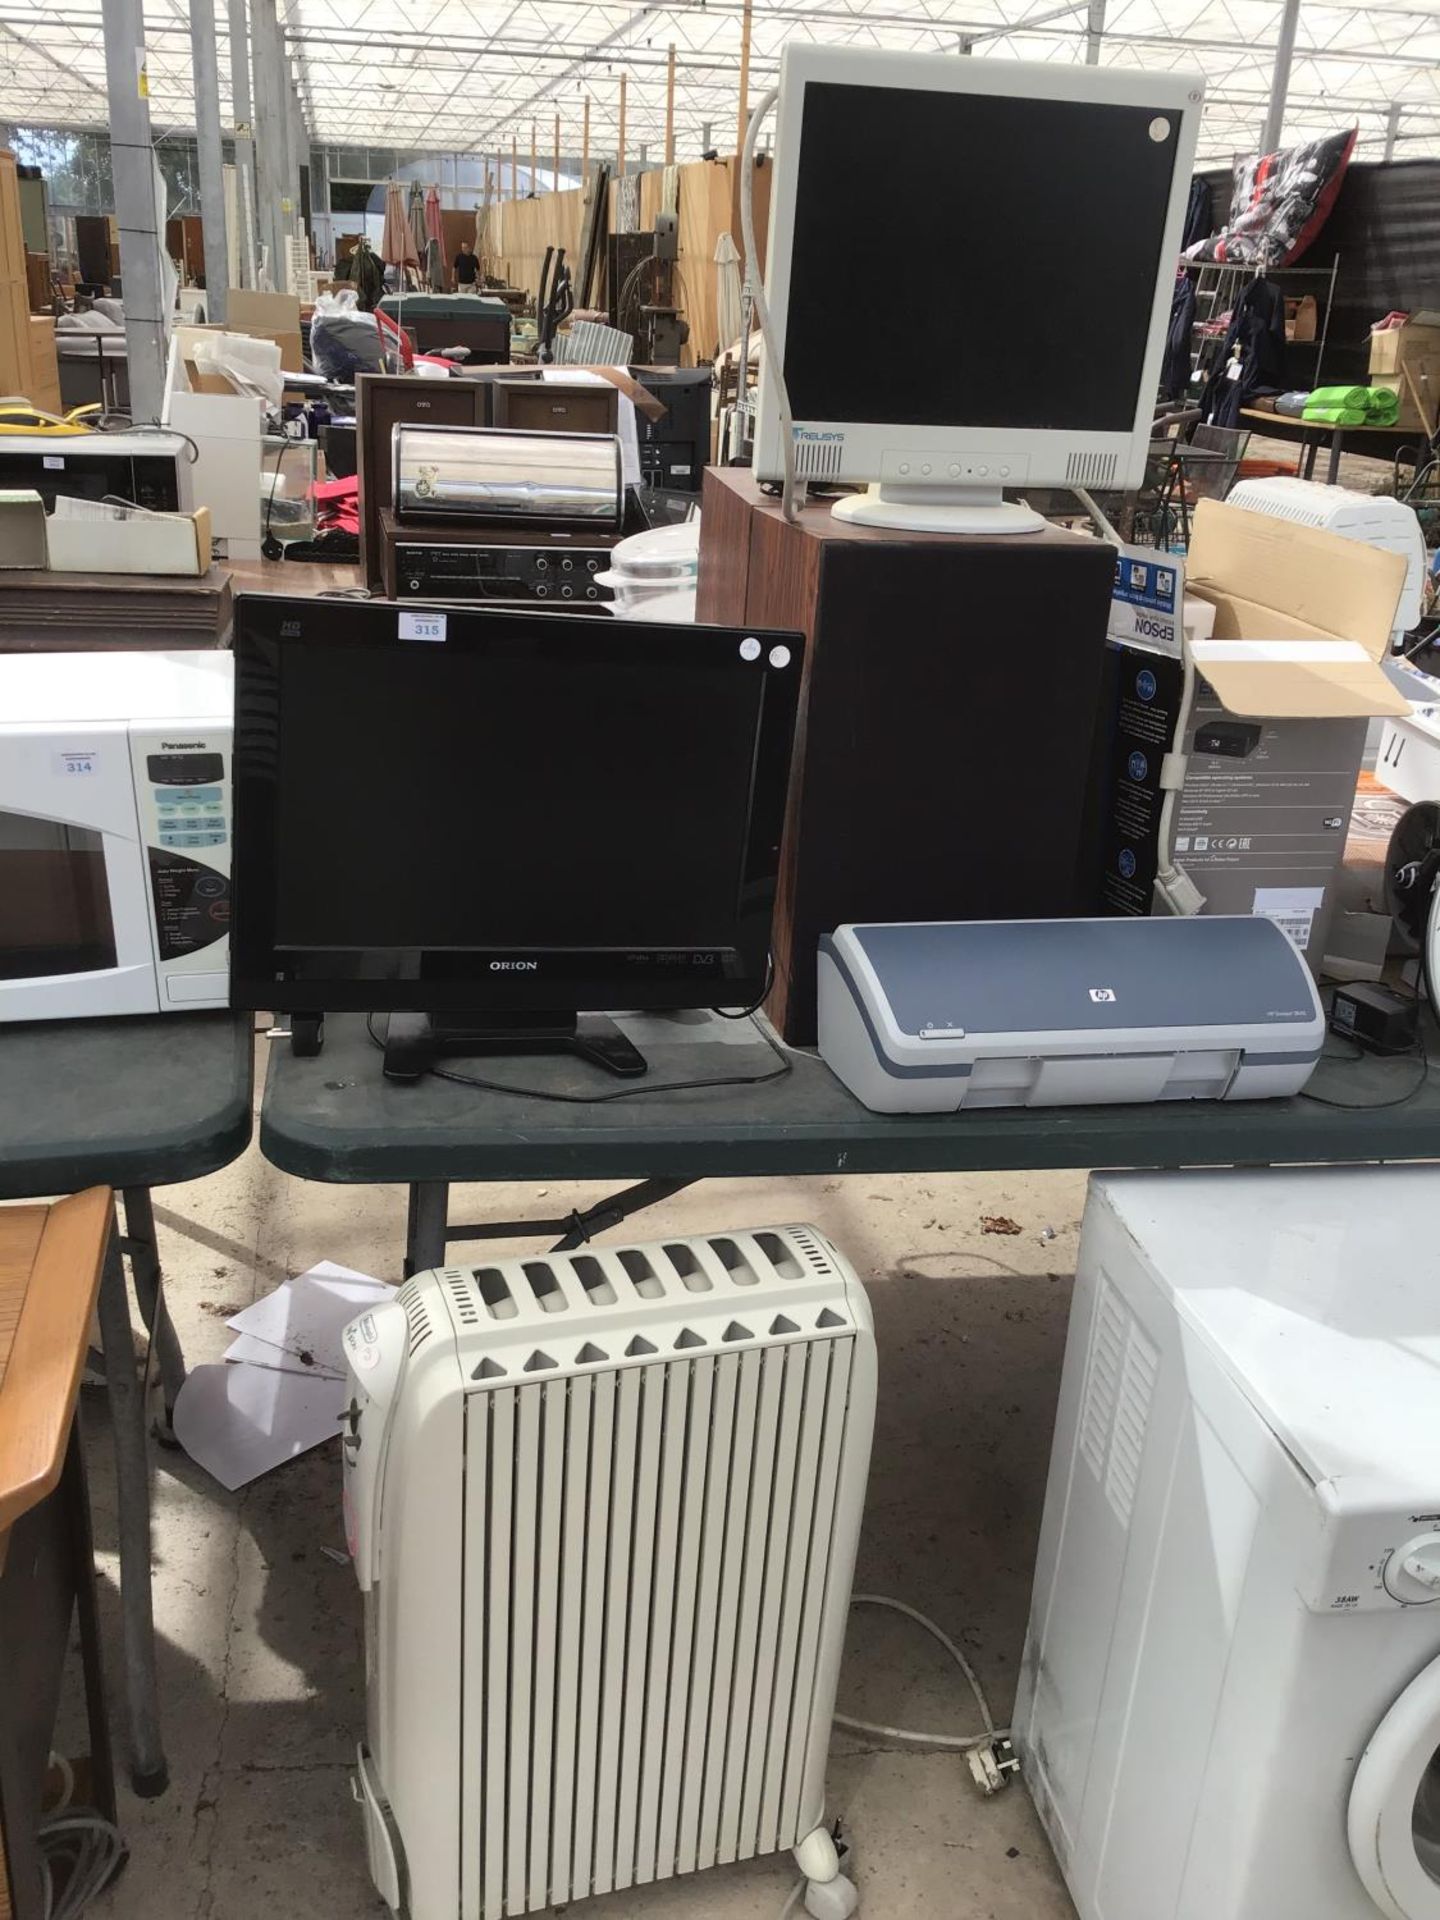 A ALRGE COLLECTION OF ELCETRICALS TO INCLUDE A ORION 19 INCH TELEVISION, HEATER, PRINTER, SPEAKERS